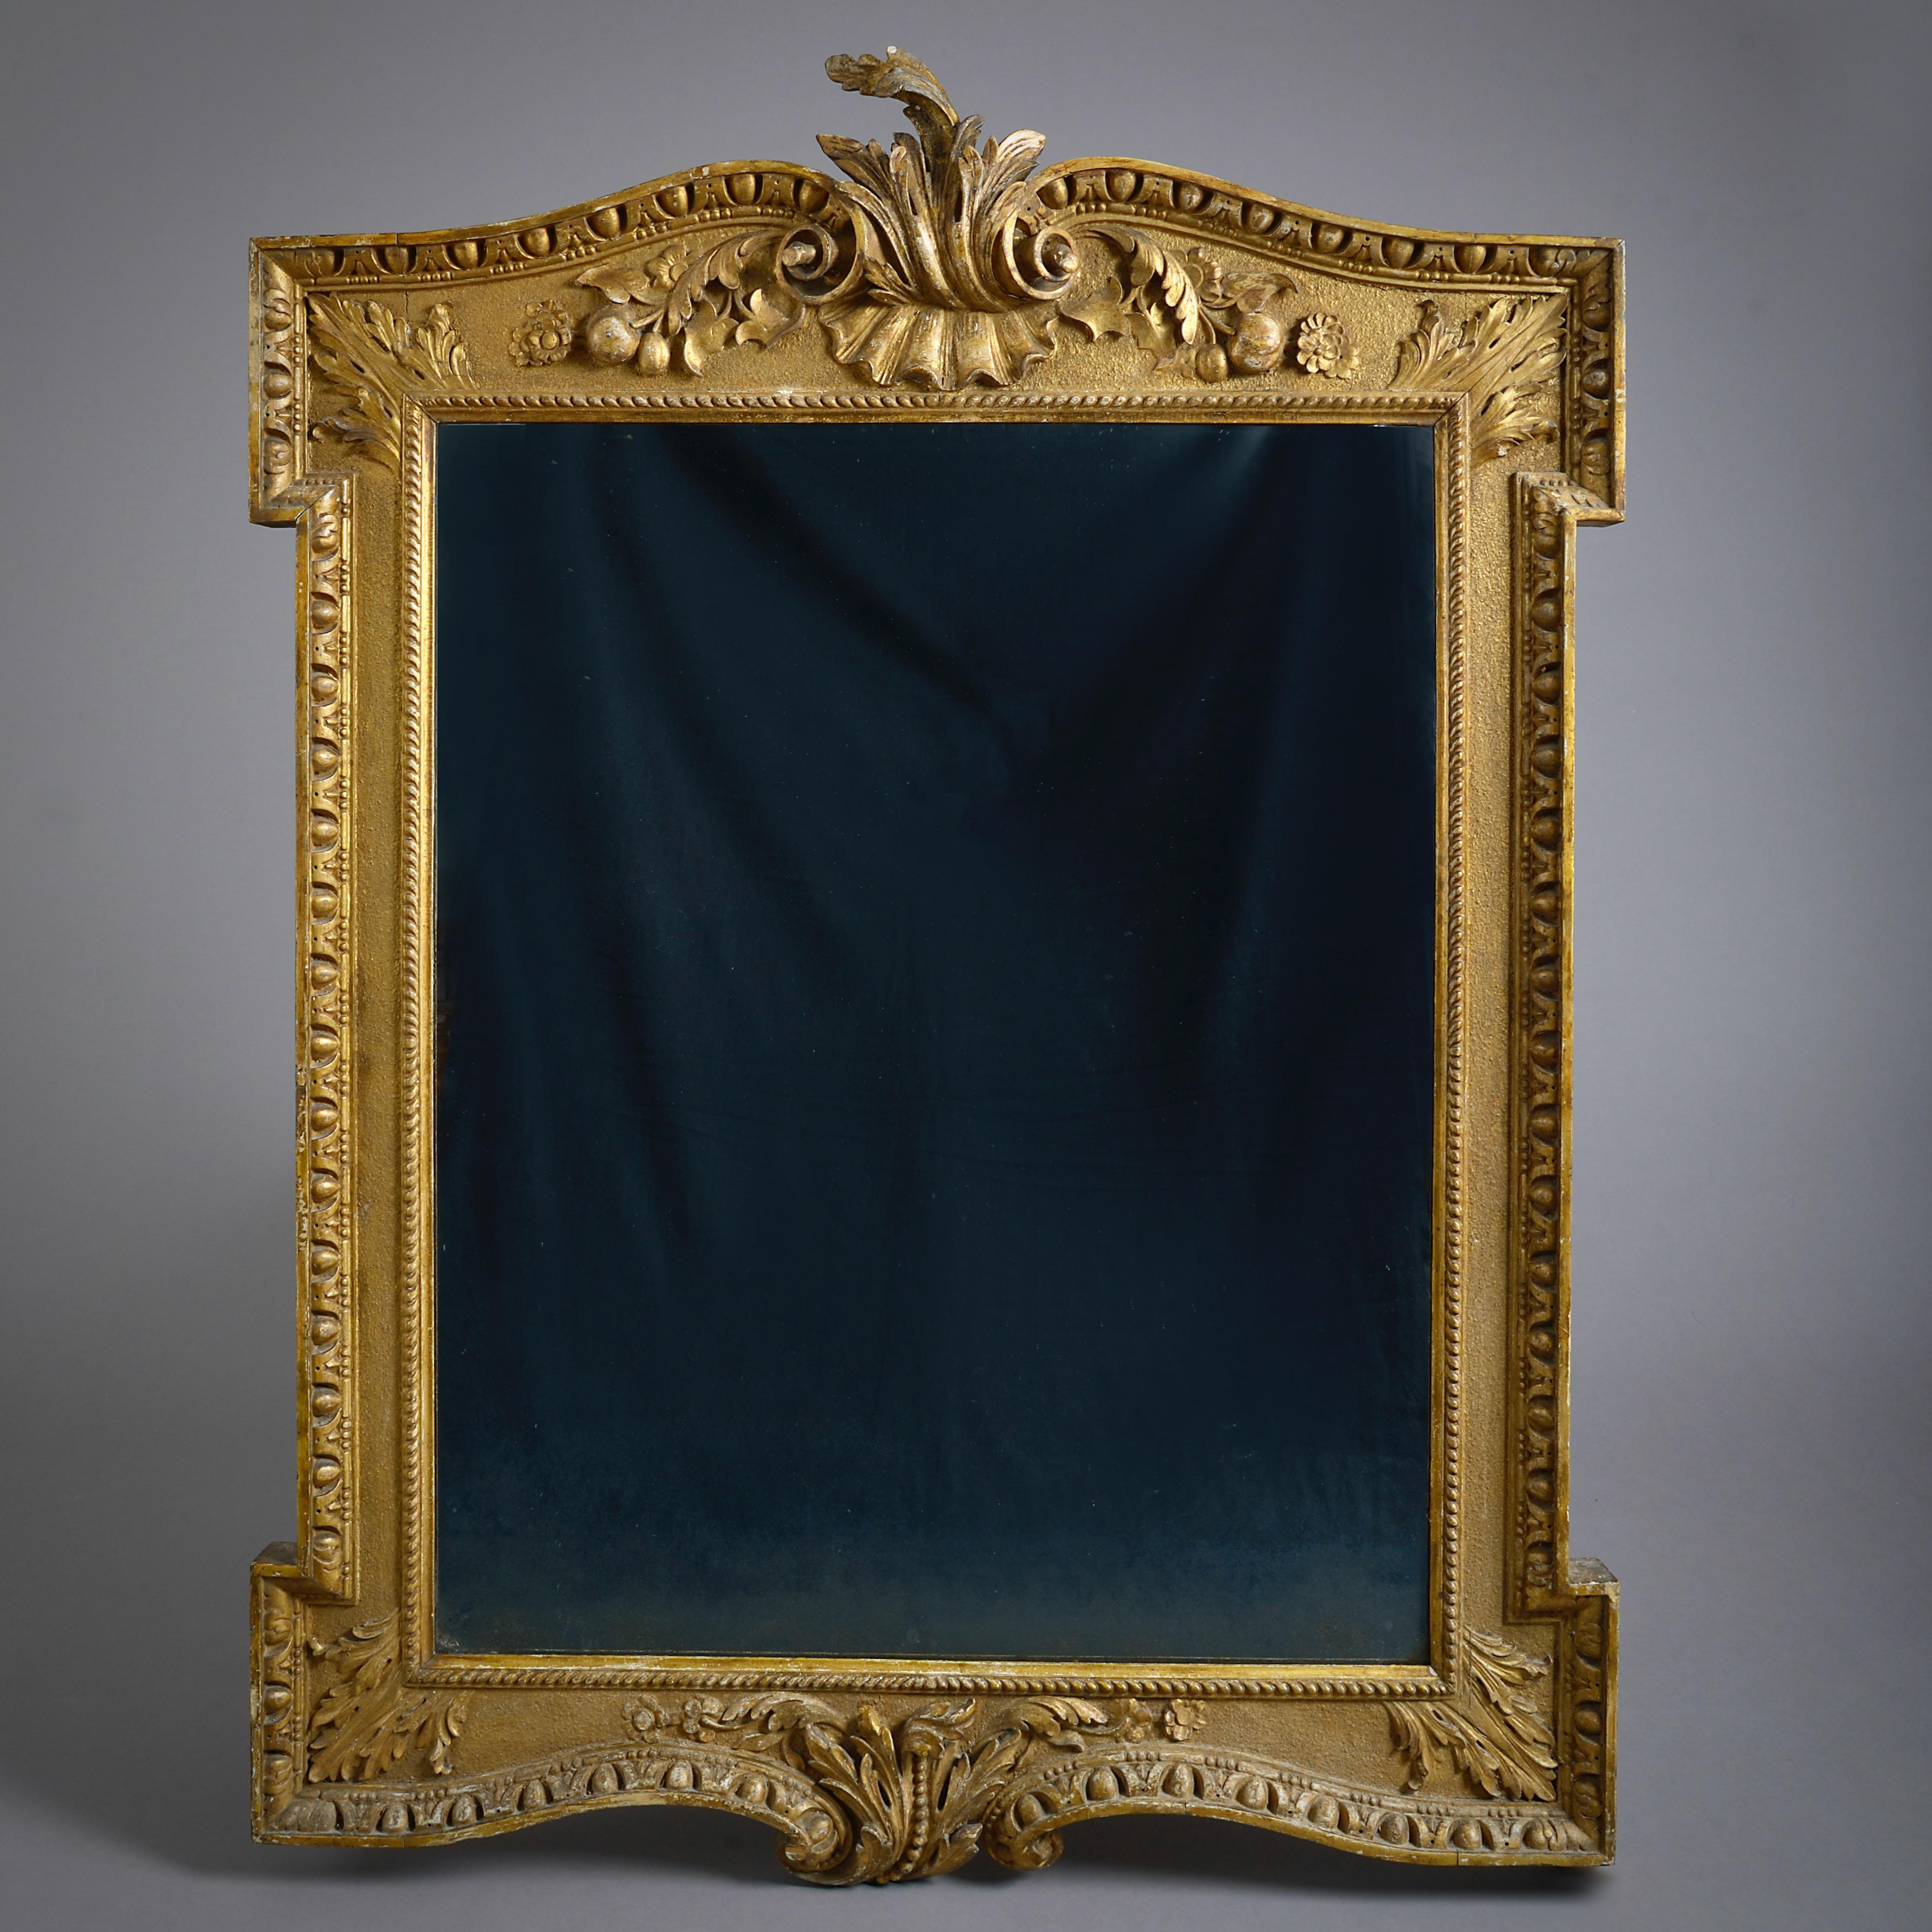 A fine George II gilt-wood mirror in the manner of William Kent, circa 1740.

With original gilding, the plate a 19th century replacement.